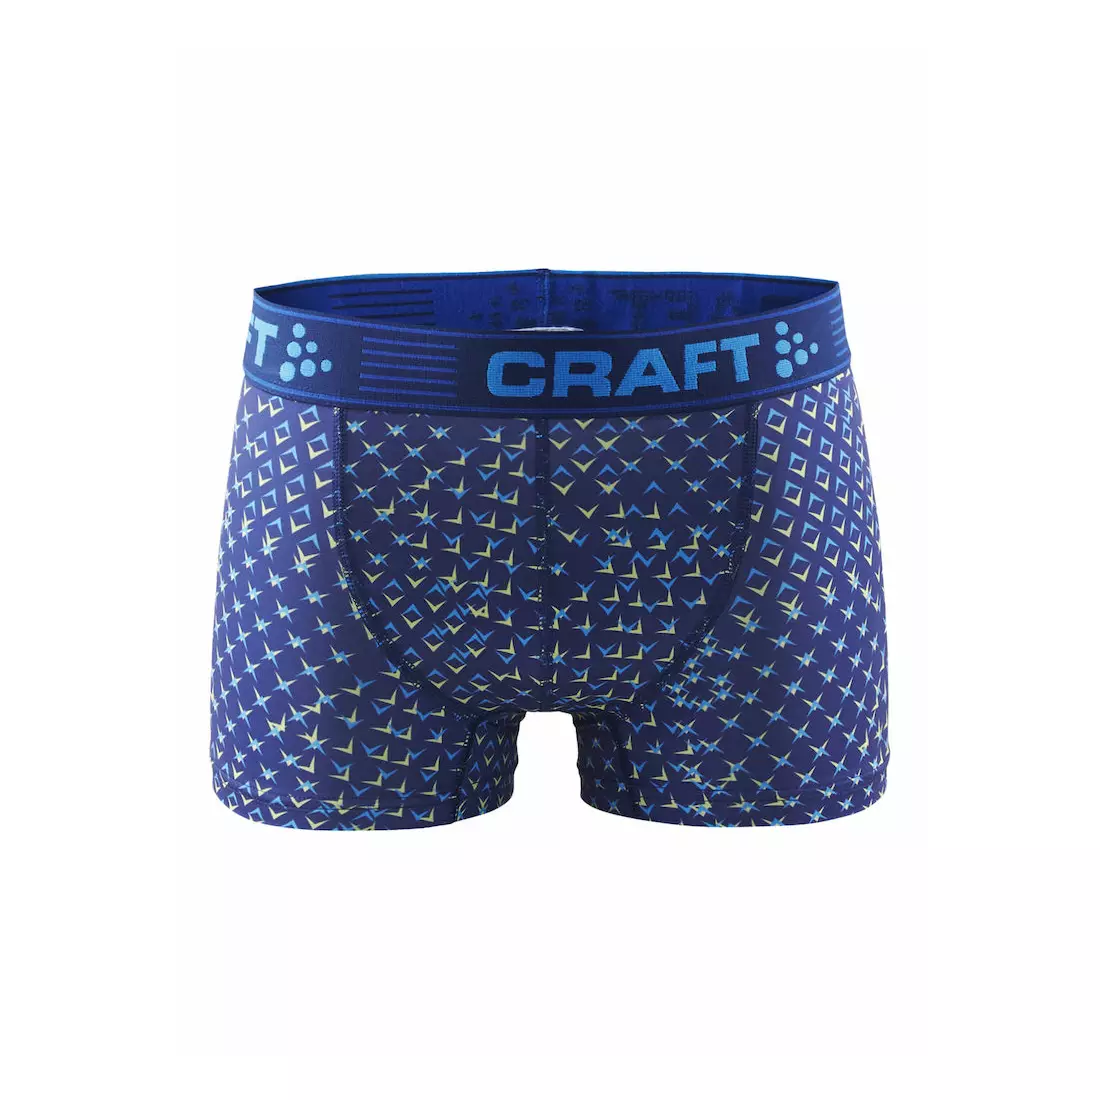 CRAFT men's sports boxer shorts 3-INCH 1905488-3108